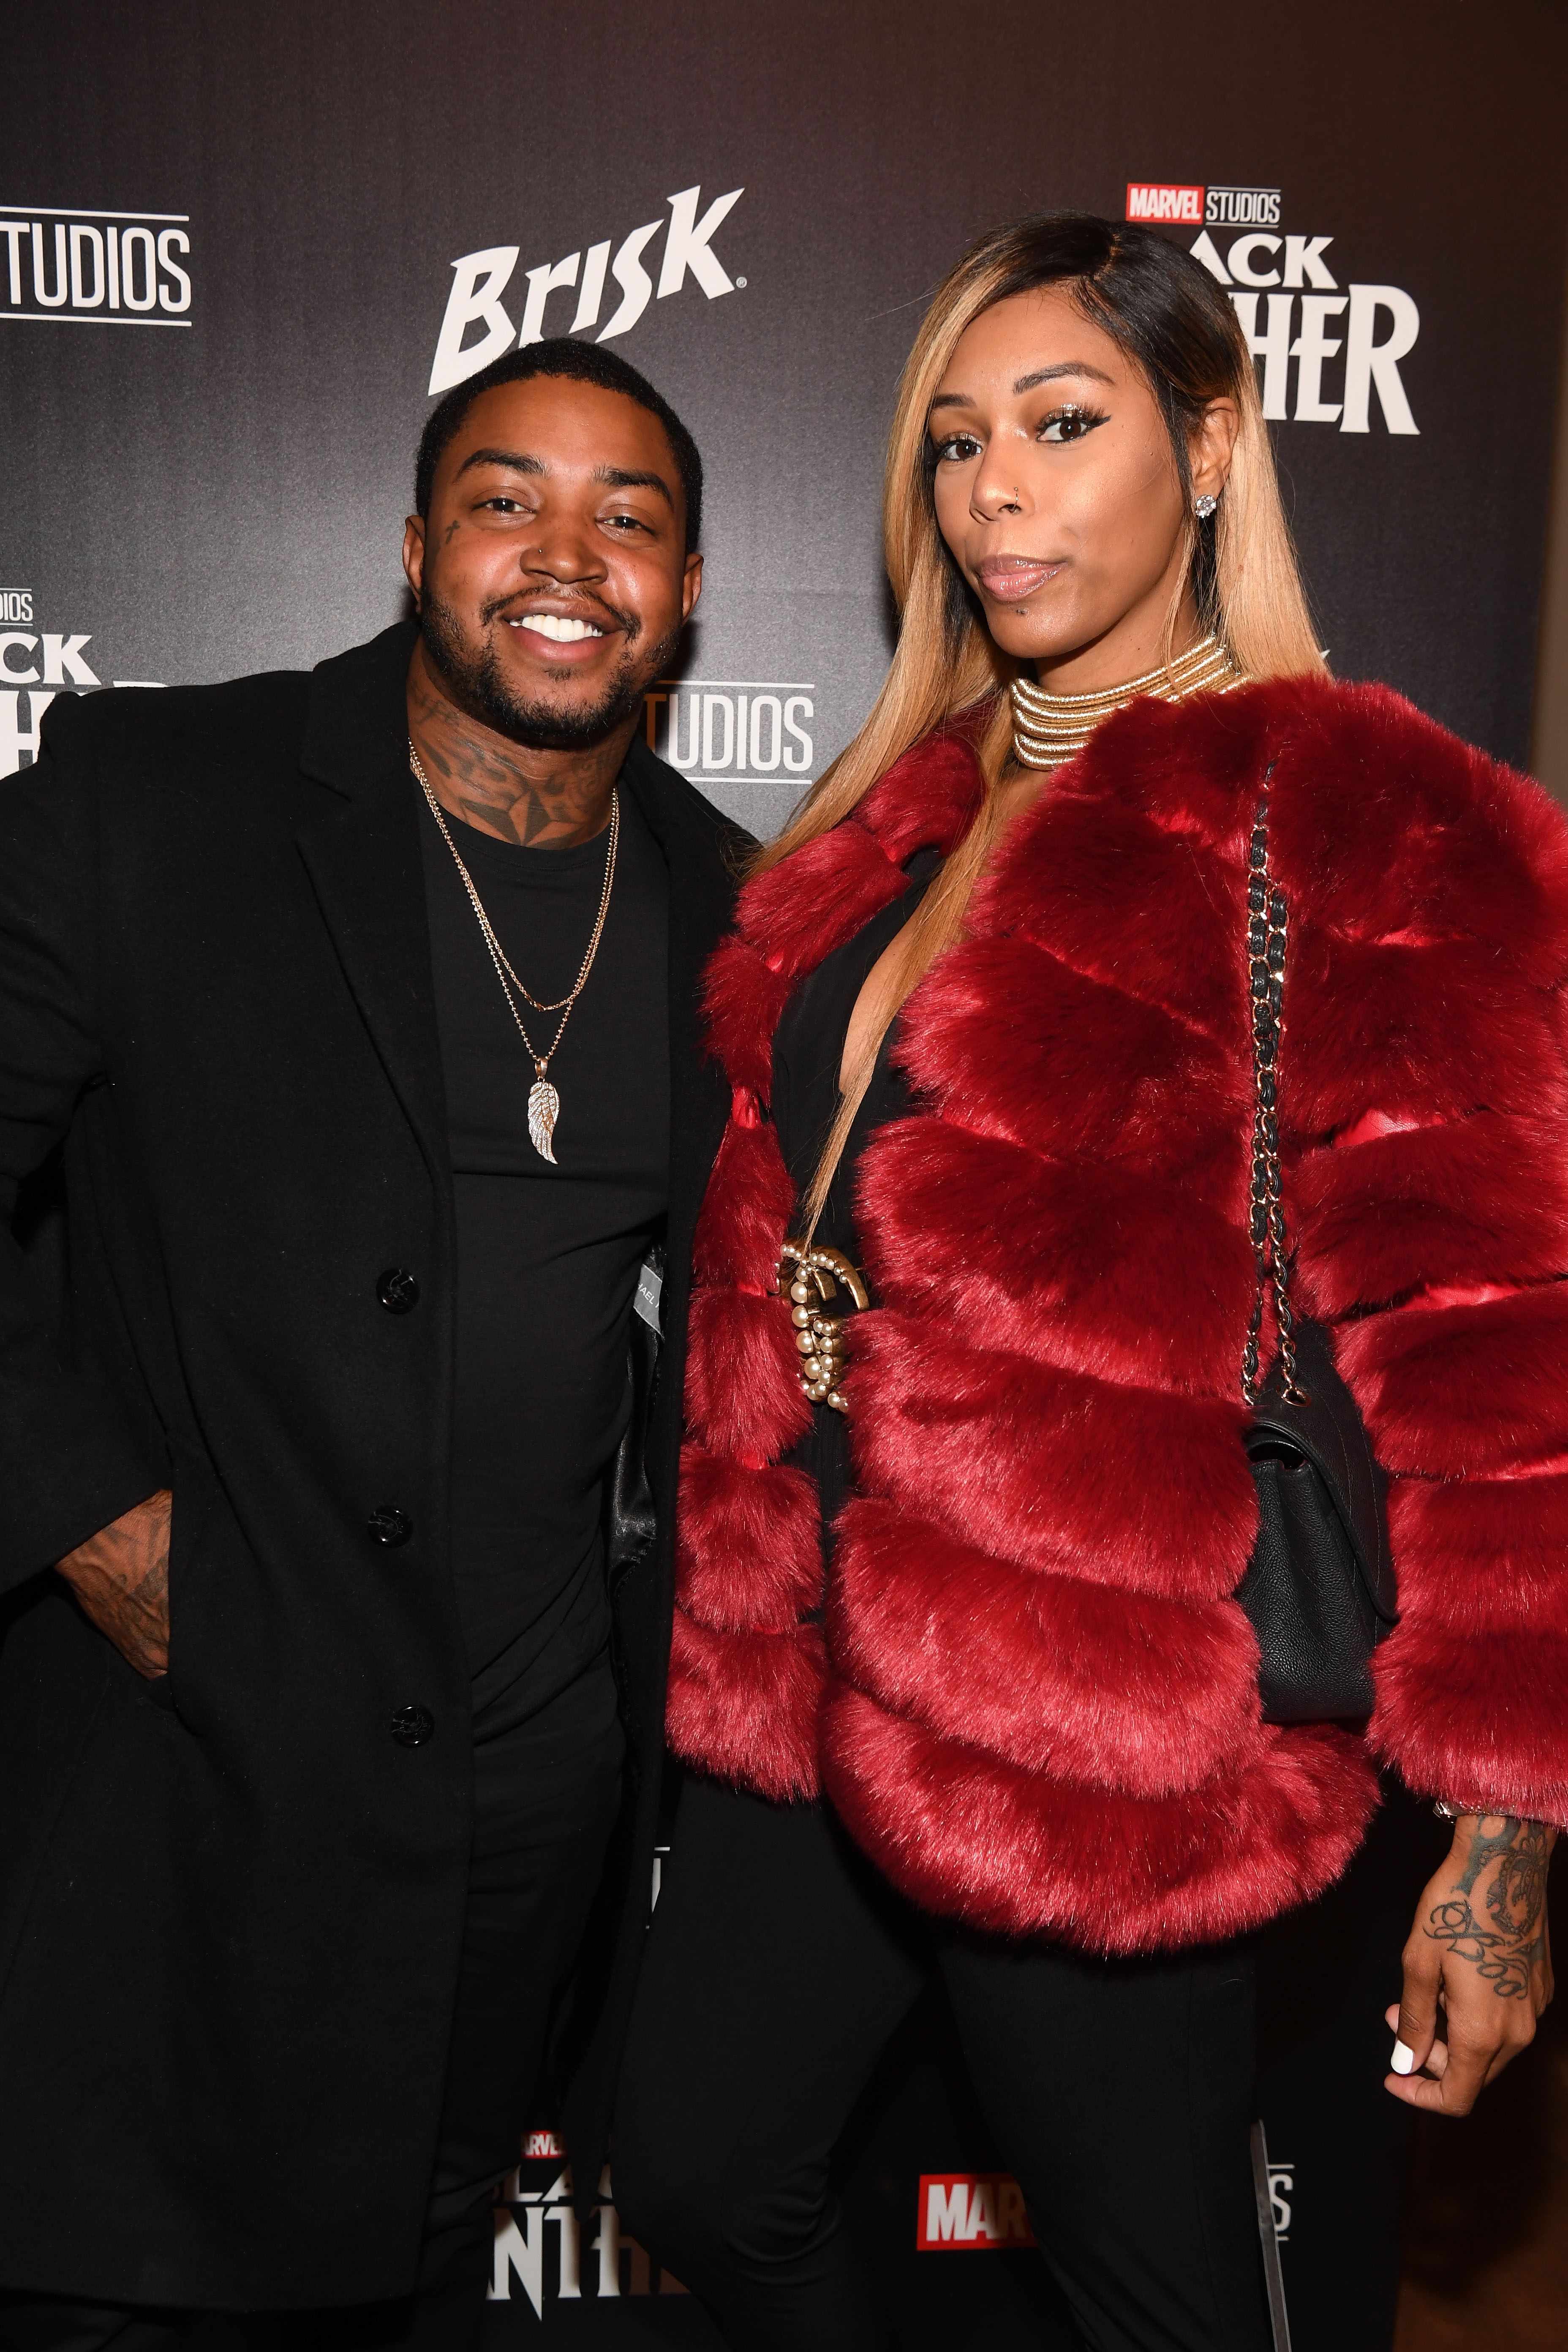 Rapper Lil Scrappy and Adiz 'Bambi' Benson at the advanced screening and panel discussion for "Black Panther" on February 14, 2018. | Photo: Getty Images